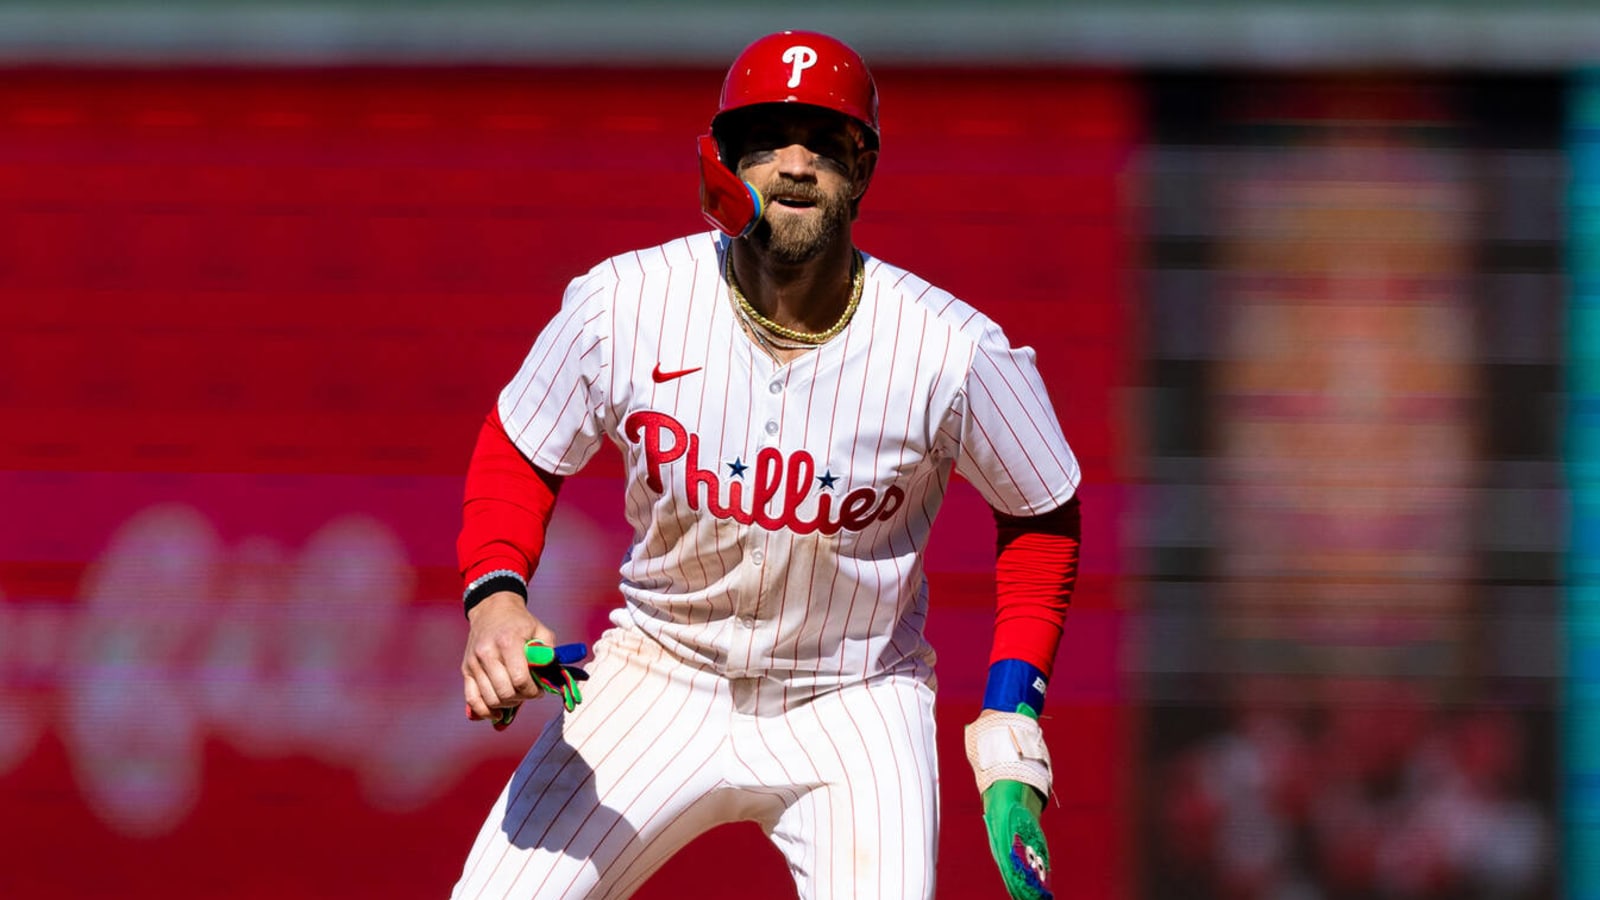 Watch: Bryce Harper avoids injury after scary tumble